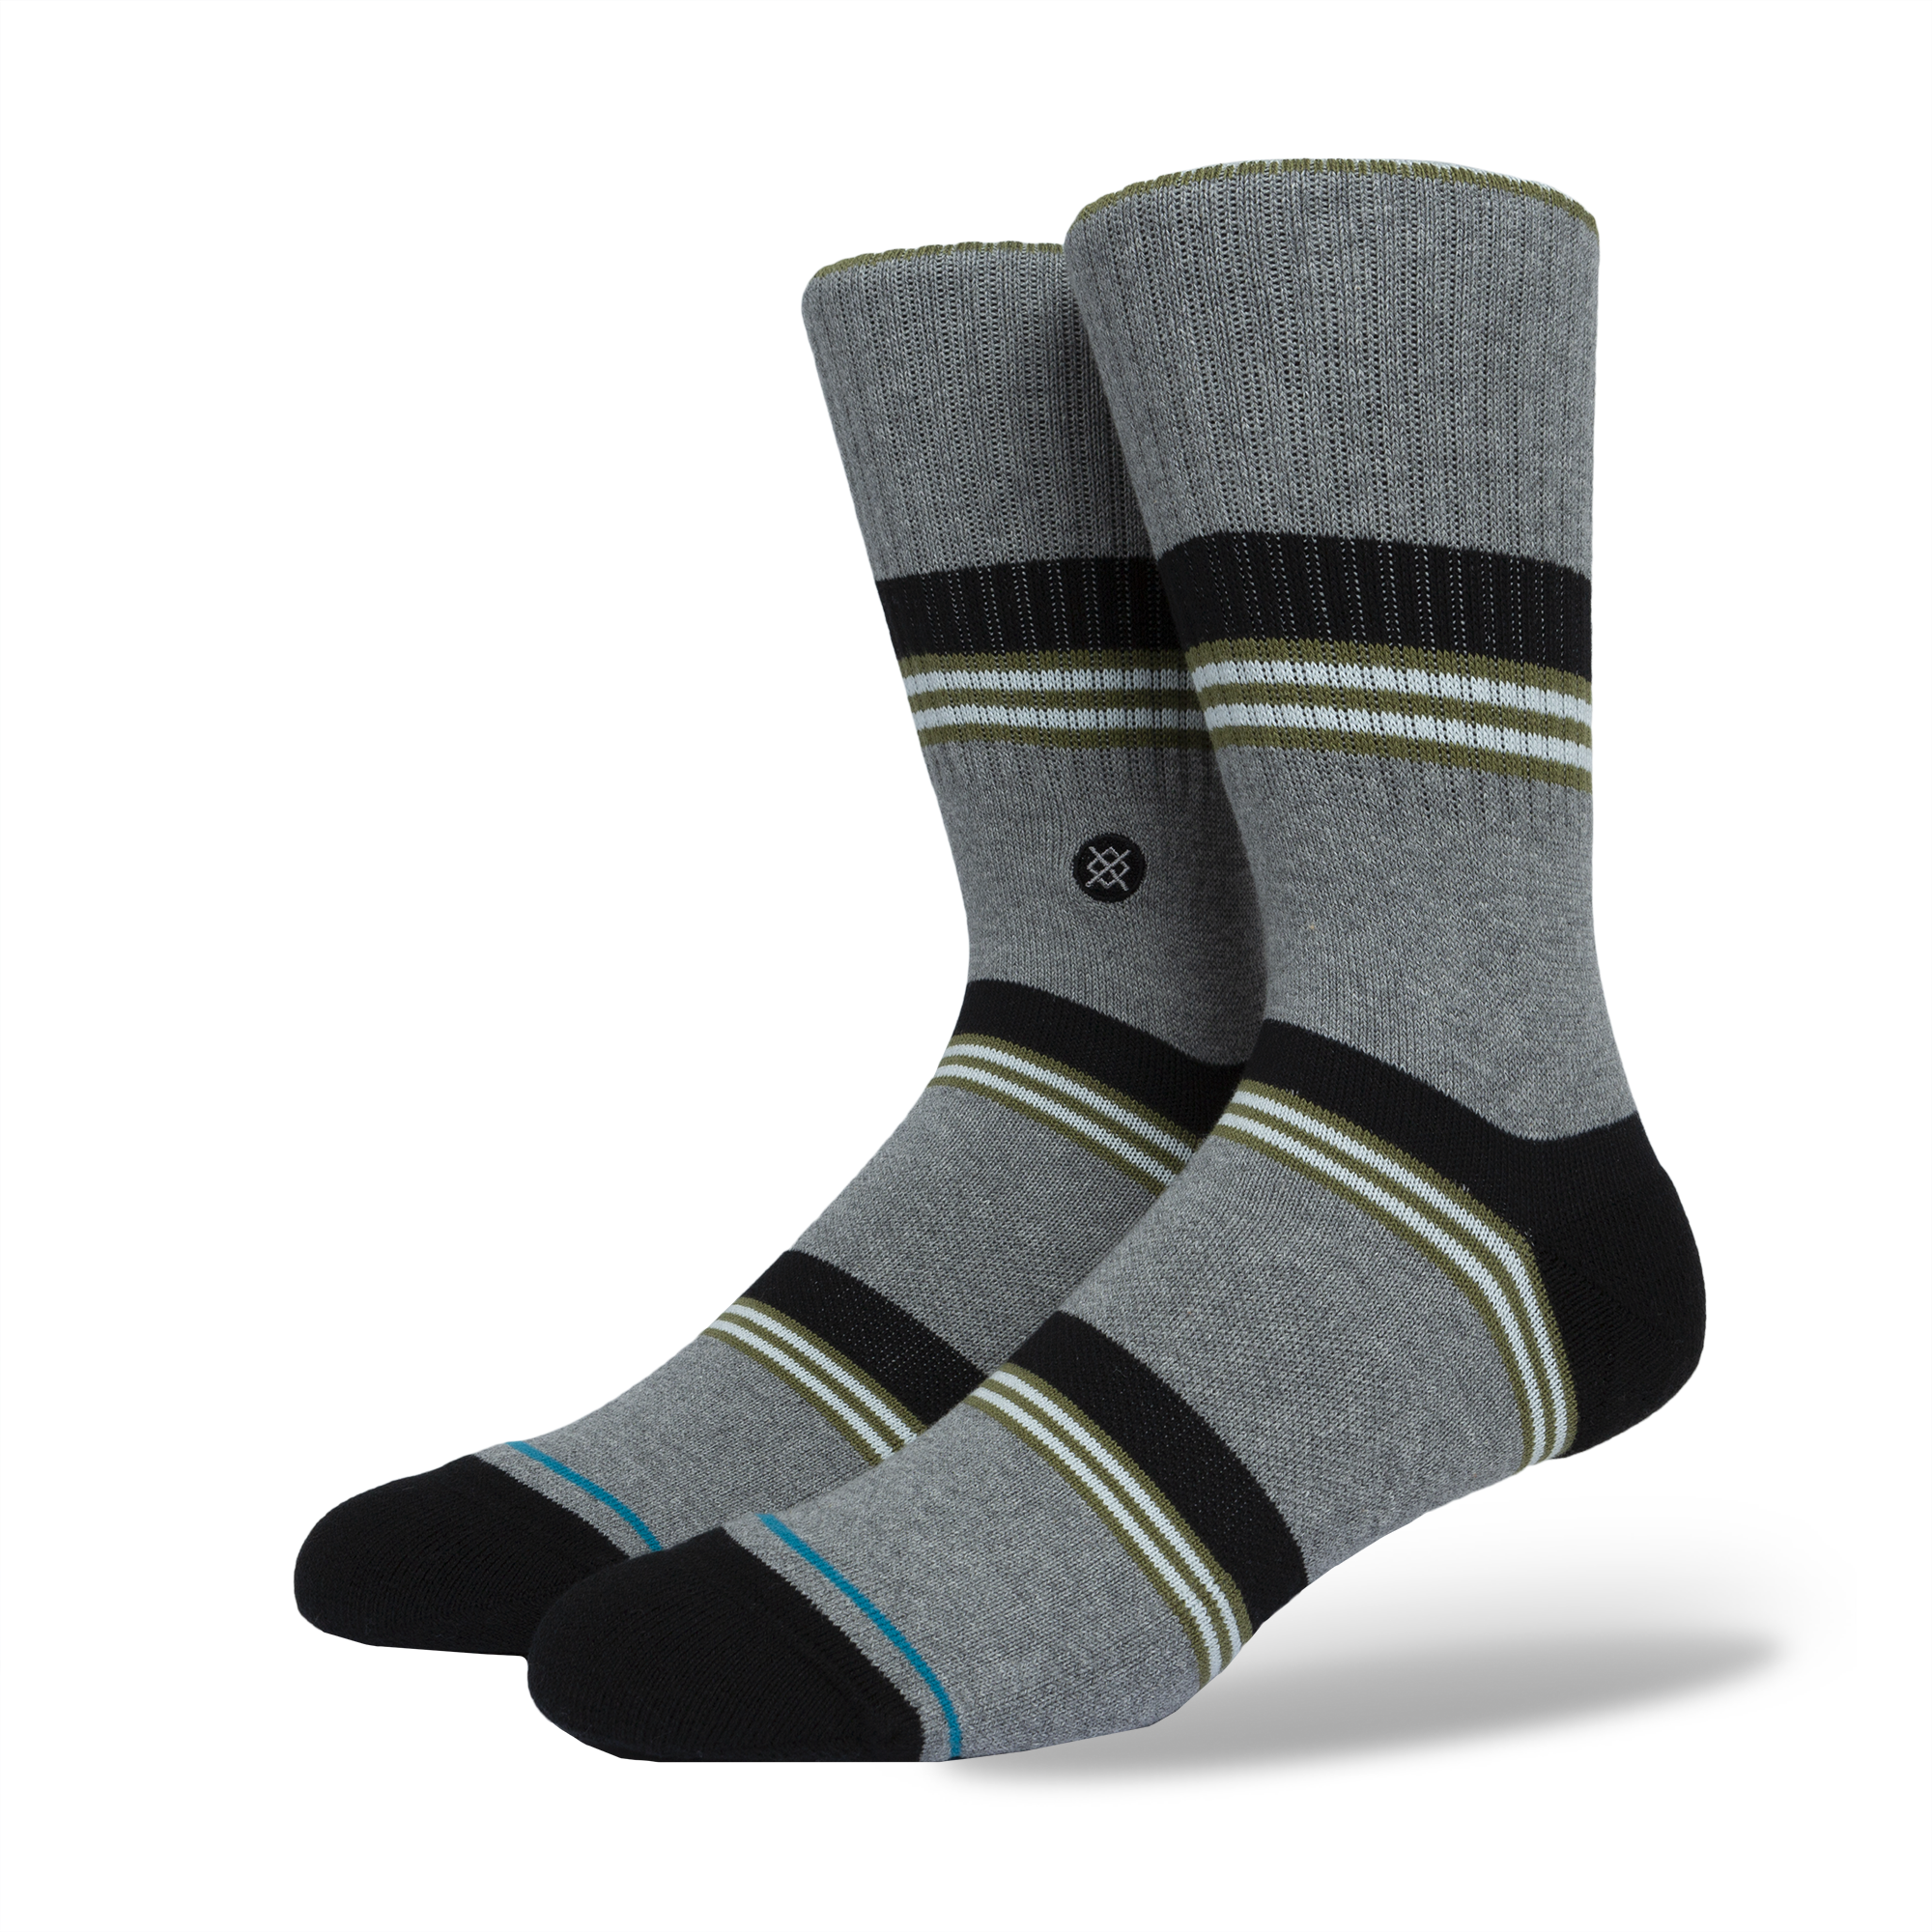 Grand Mid Cushion Combed Cotton Crew 3 Pack Socks | Stance